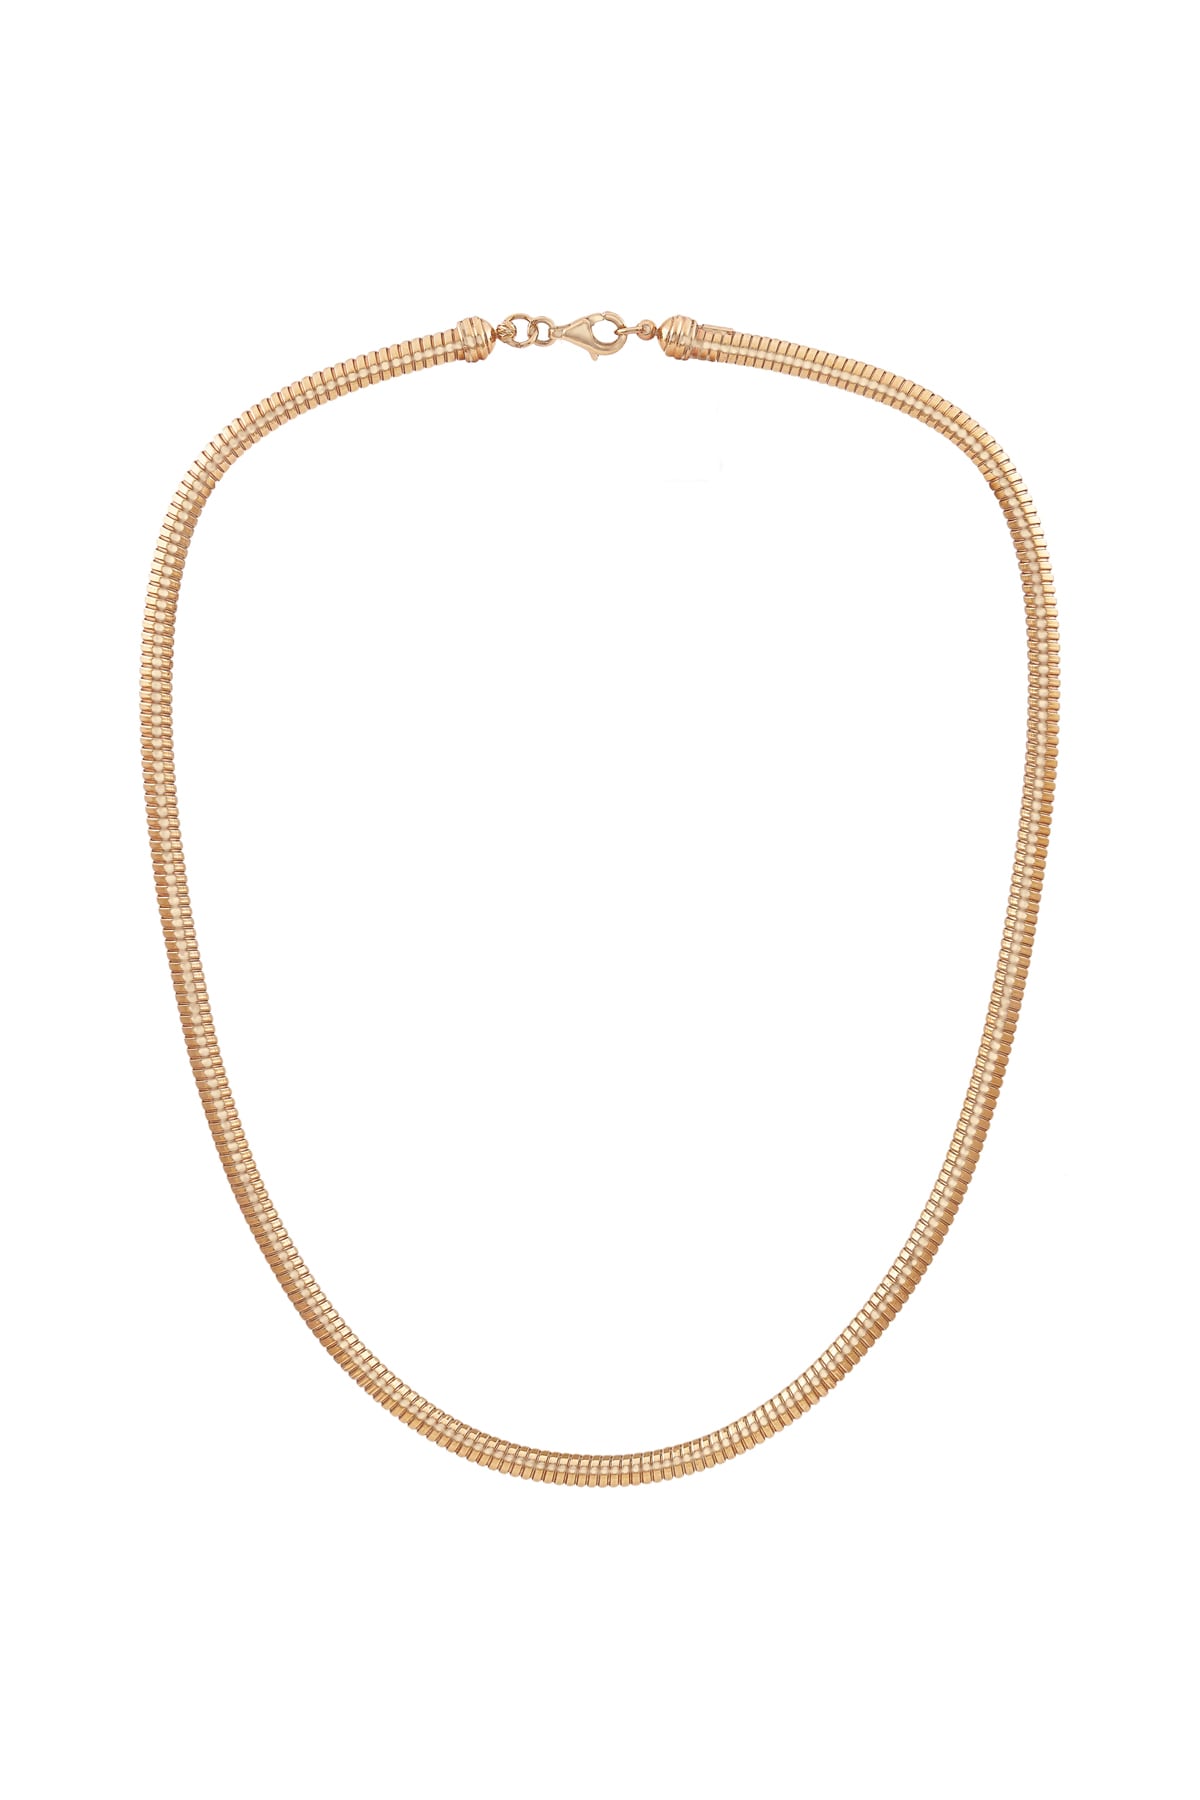 Fancy Snake Style Collier Chain In 14ct Italian Rose Gold from LeGassick.